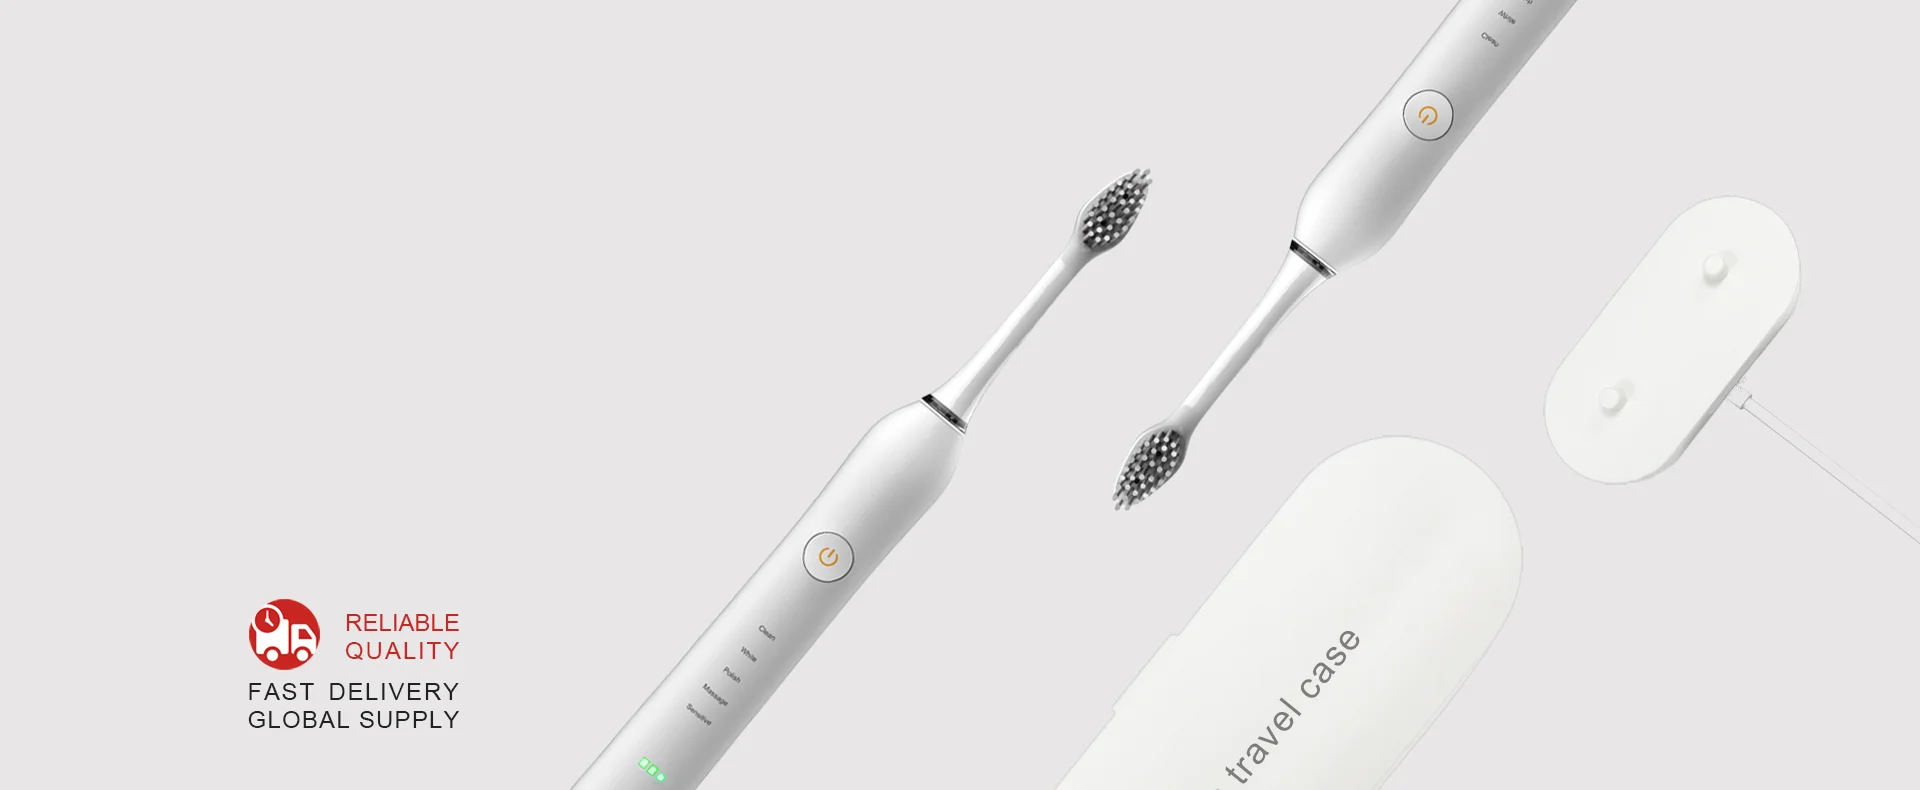 private label <a href='https://www.relish-tech.com' target='_blank'><b><a href='https://www.relish-tech.com/wholesale/electric-toothbrush.html' target='_blank'><b>electric toothbrush</b></a> manufacturer</b></a>